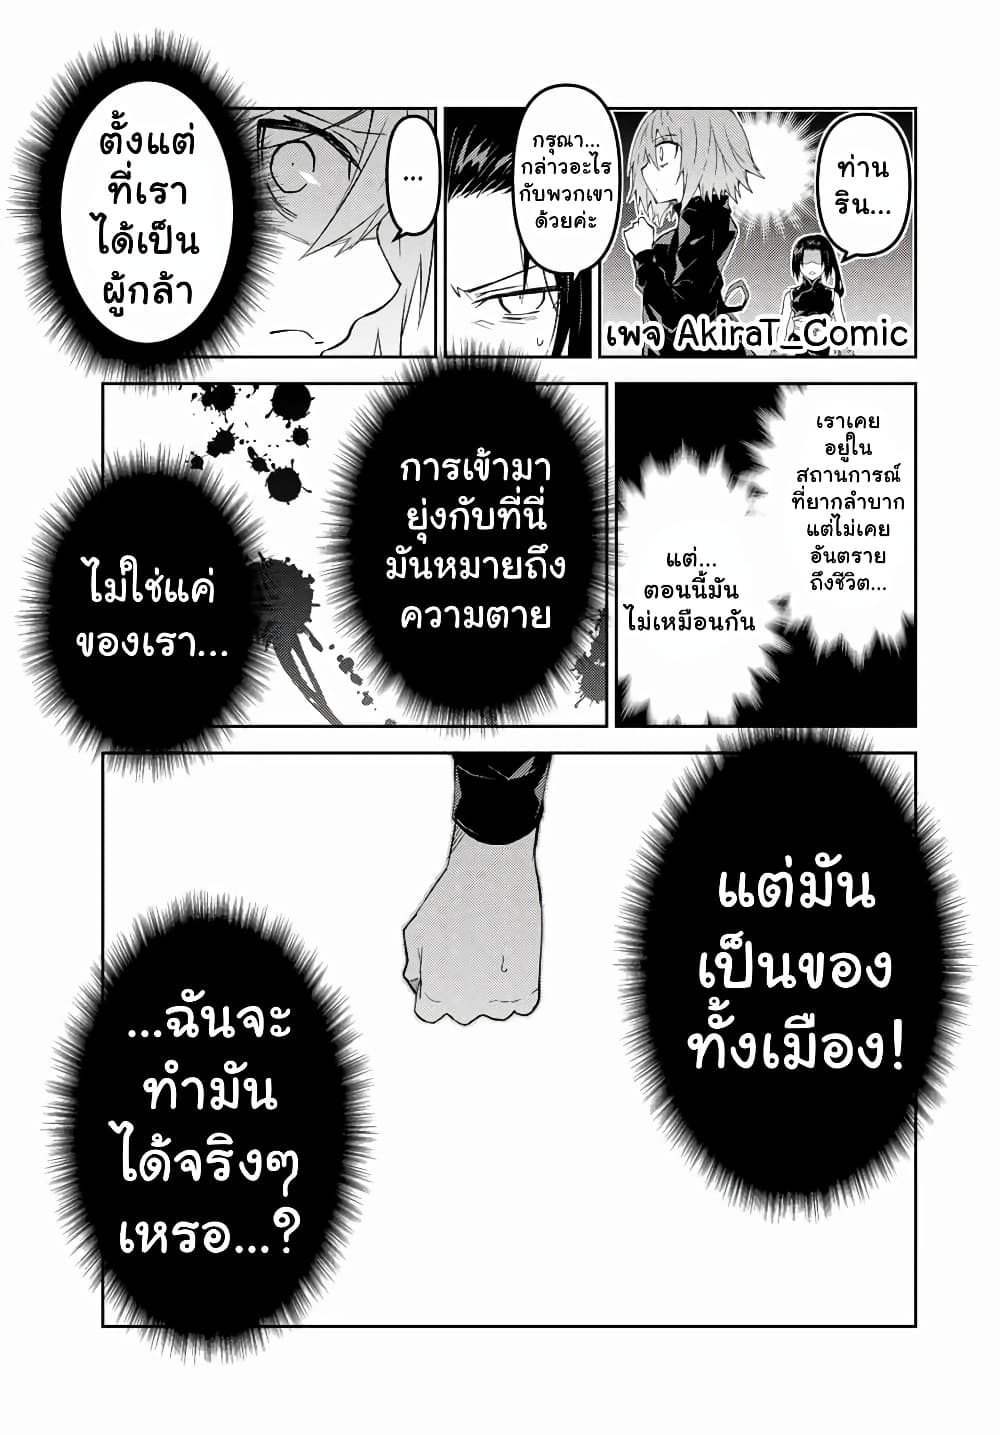 The Weakest Occupation "Blacksmith", but It's Actually the Strongest ช่างตีเหล็กอาชีพกระจอก? 48-48